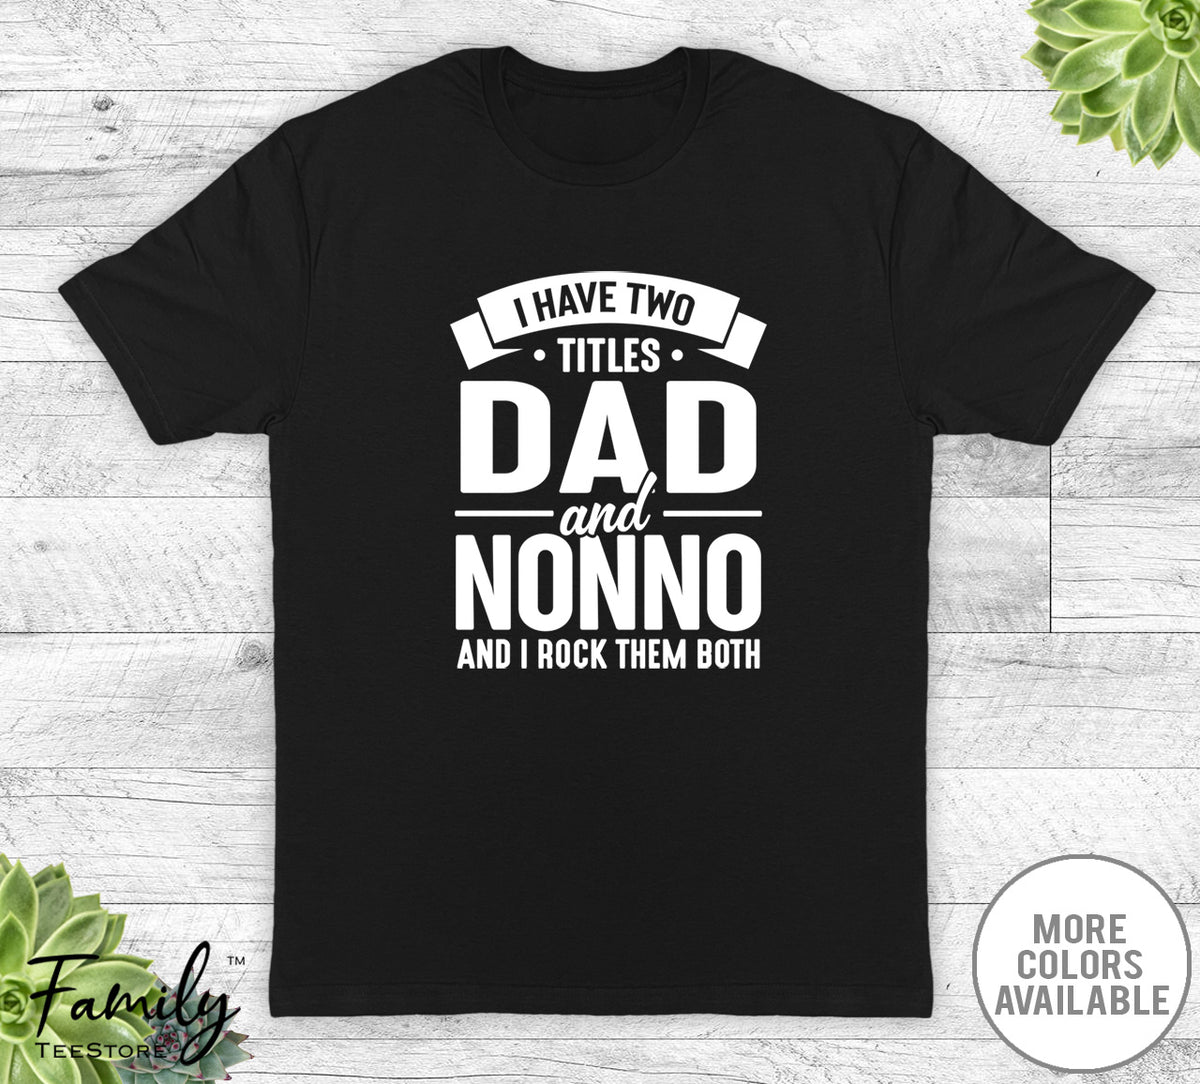 I Have Two Titles Dad And Nonno - Unisex T-shirt - Nonno Shirt - Funny Nonno Gift - familyteeprints